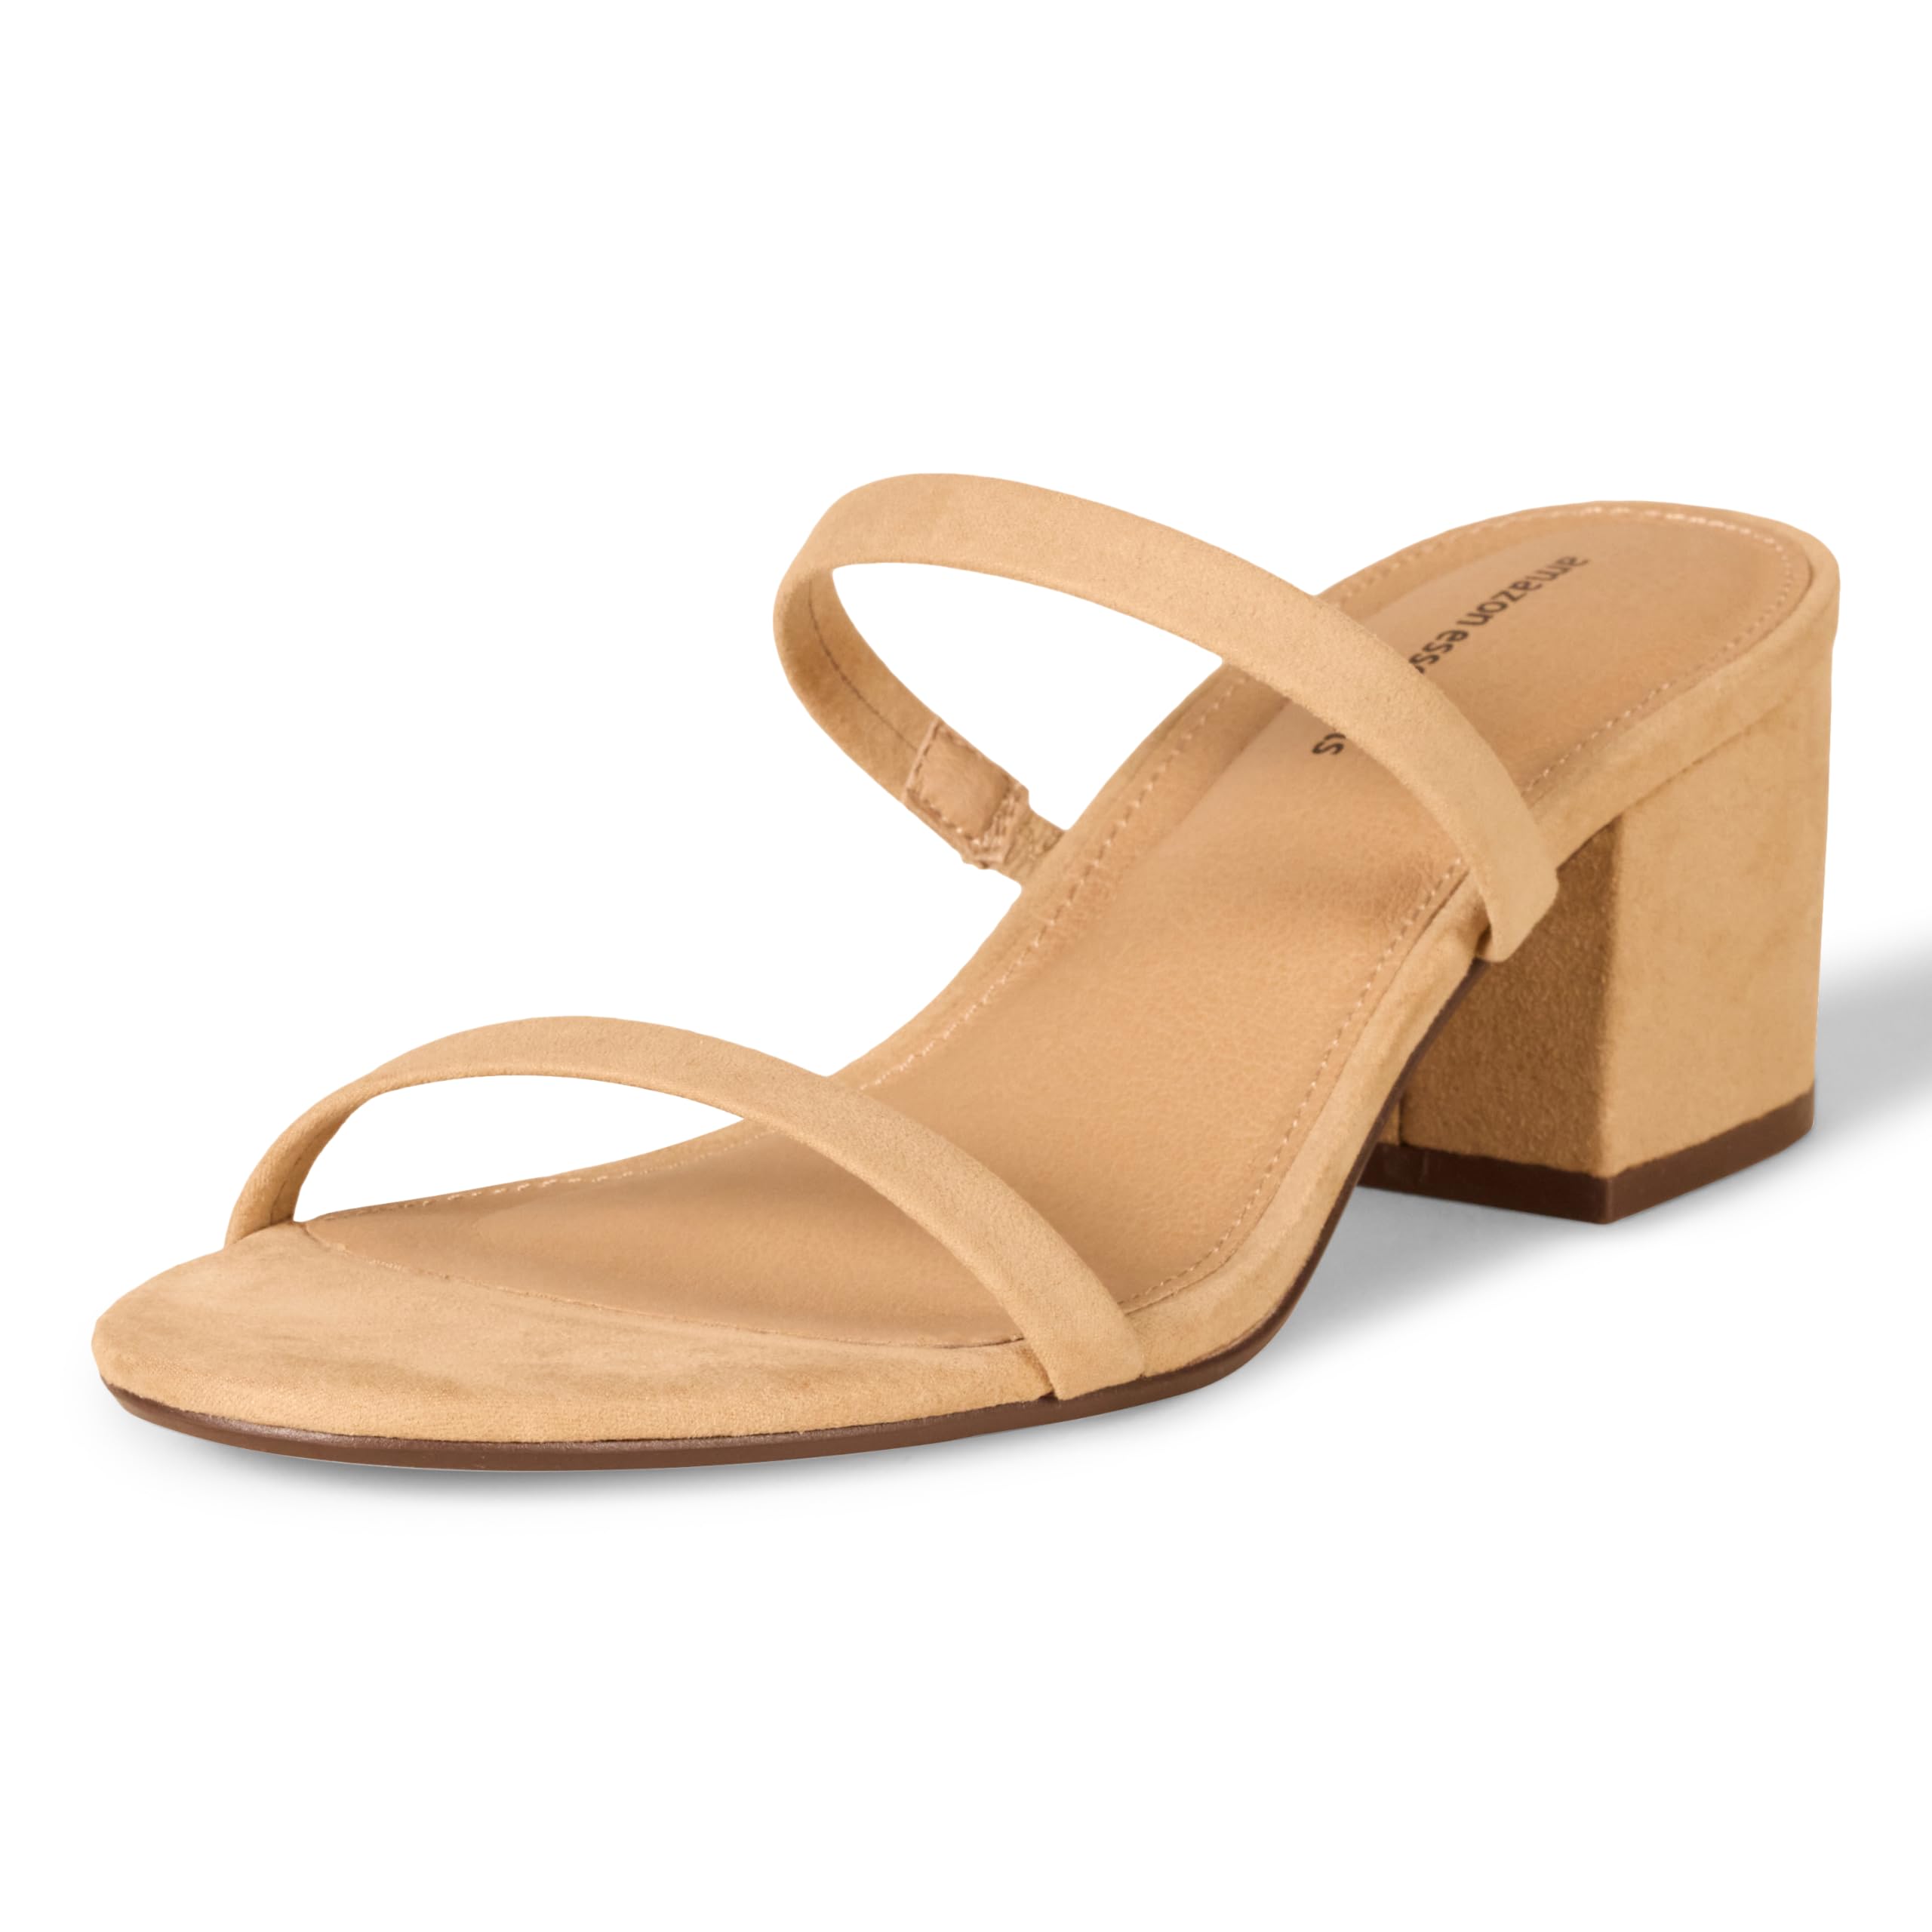 Amazon Essentials Women's Thin Two Strap Heeled Slide (Tan) $8.90 + Free Shipping w/ Prime or on $35+